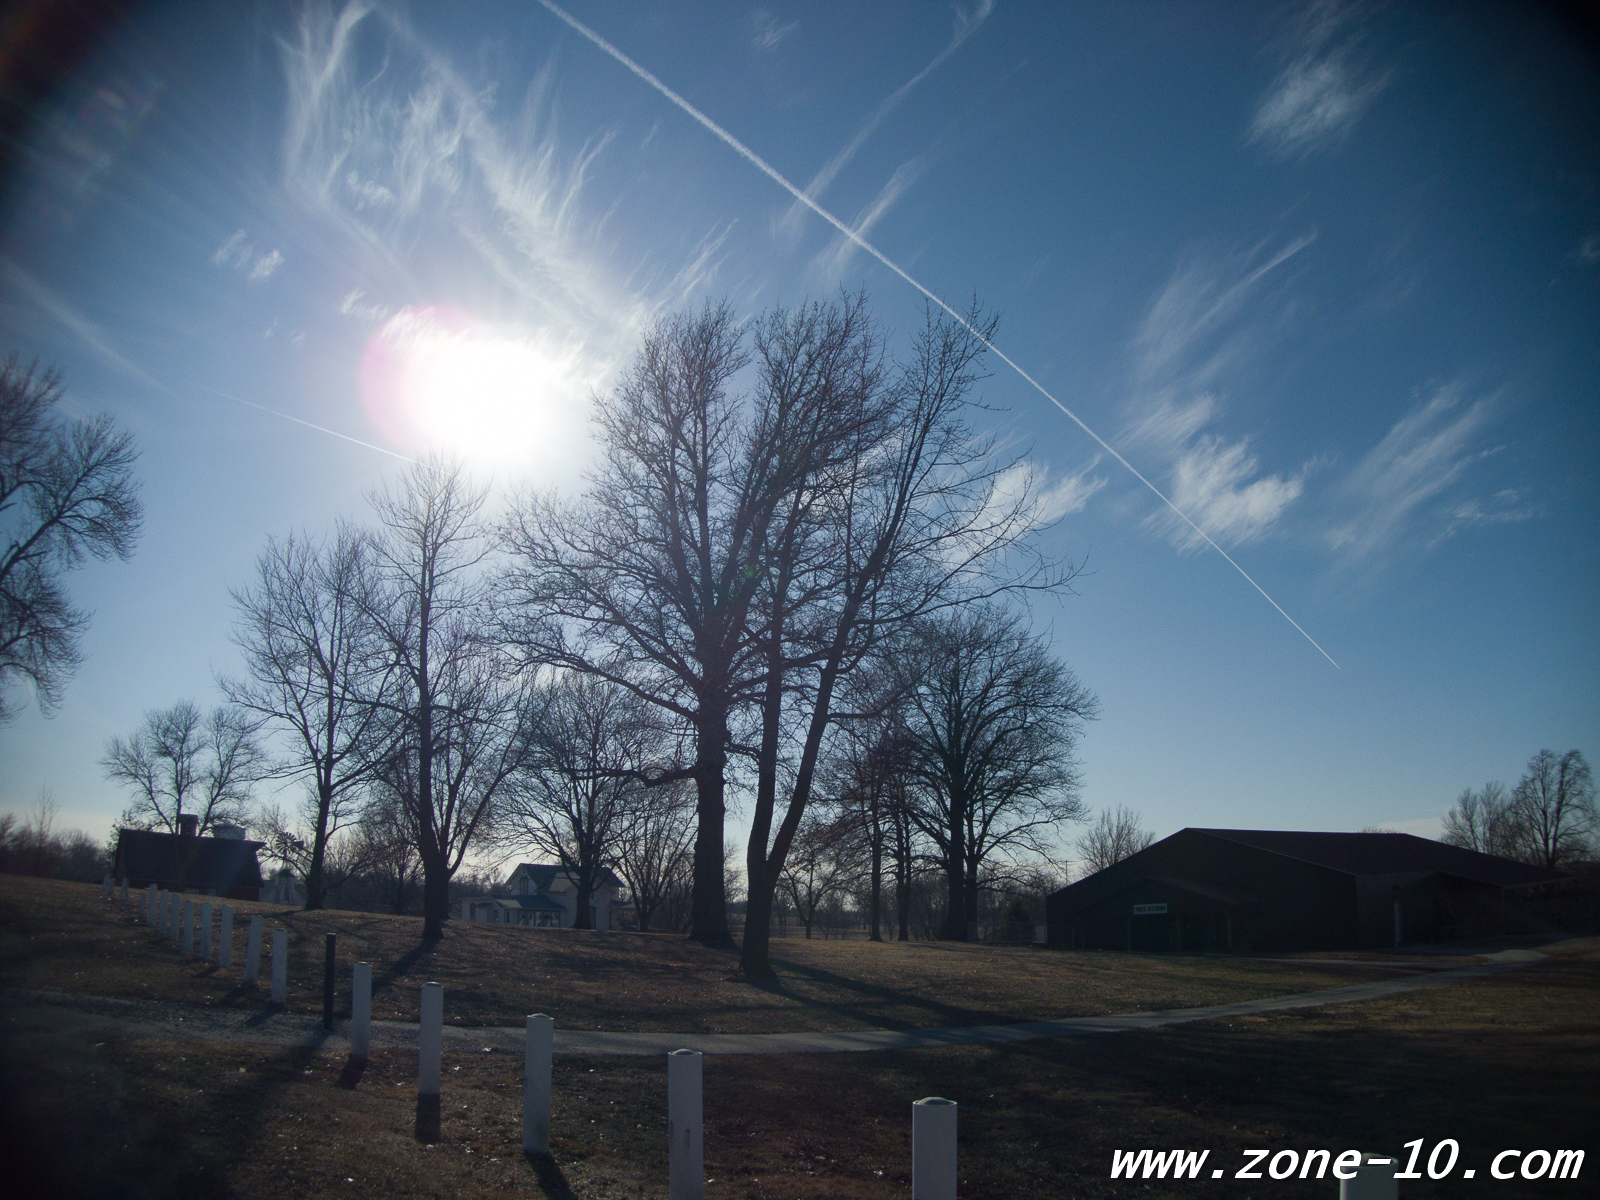 wide-angle flare and vignetting